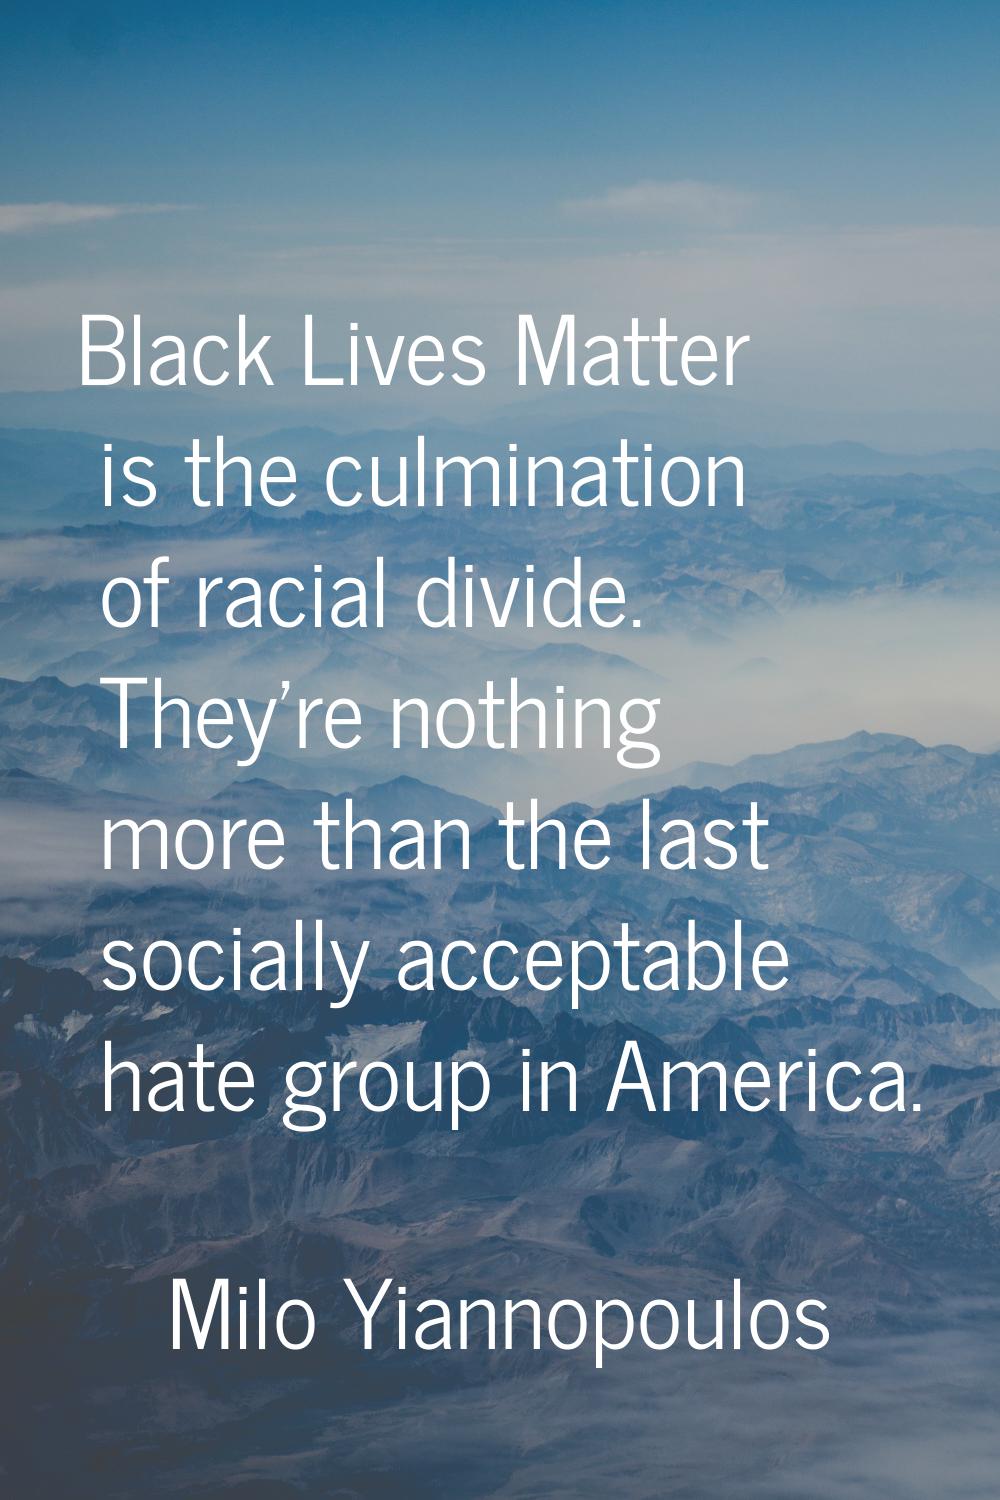 Black Lives Matter is the culmination of racial divide. They're nothing more than the last socially